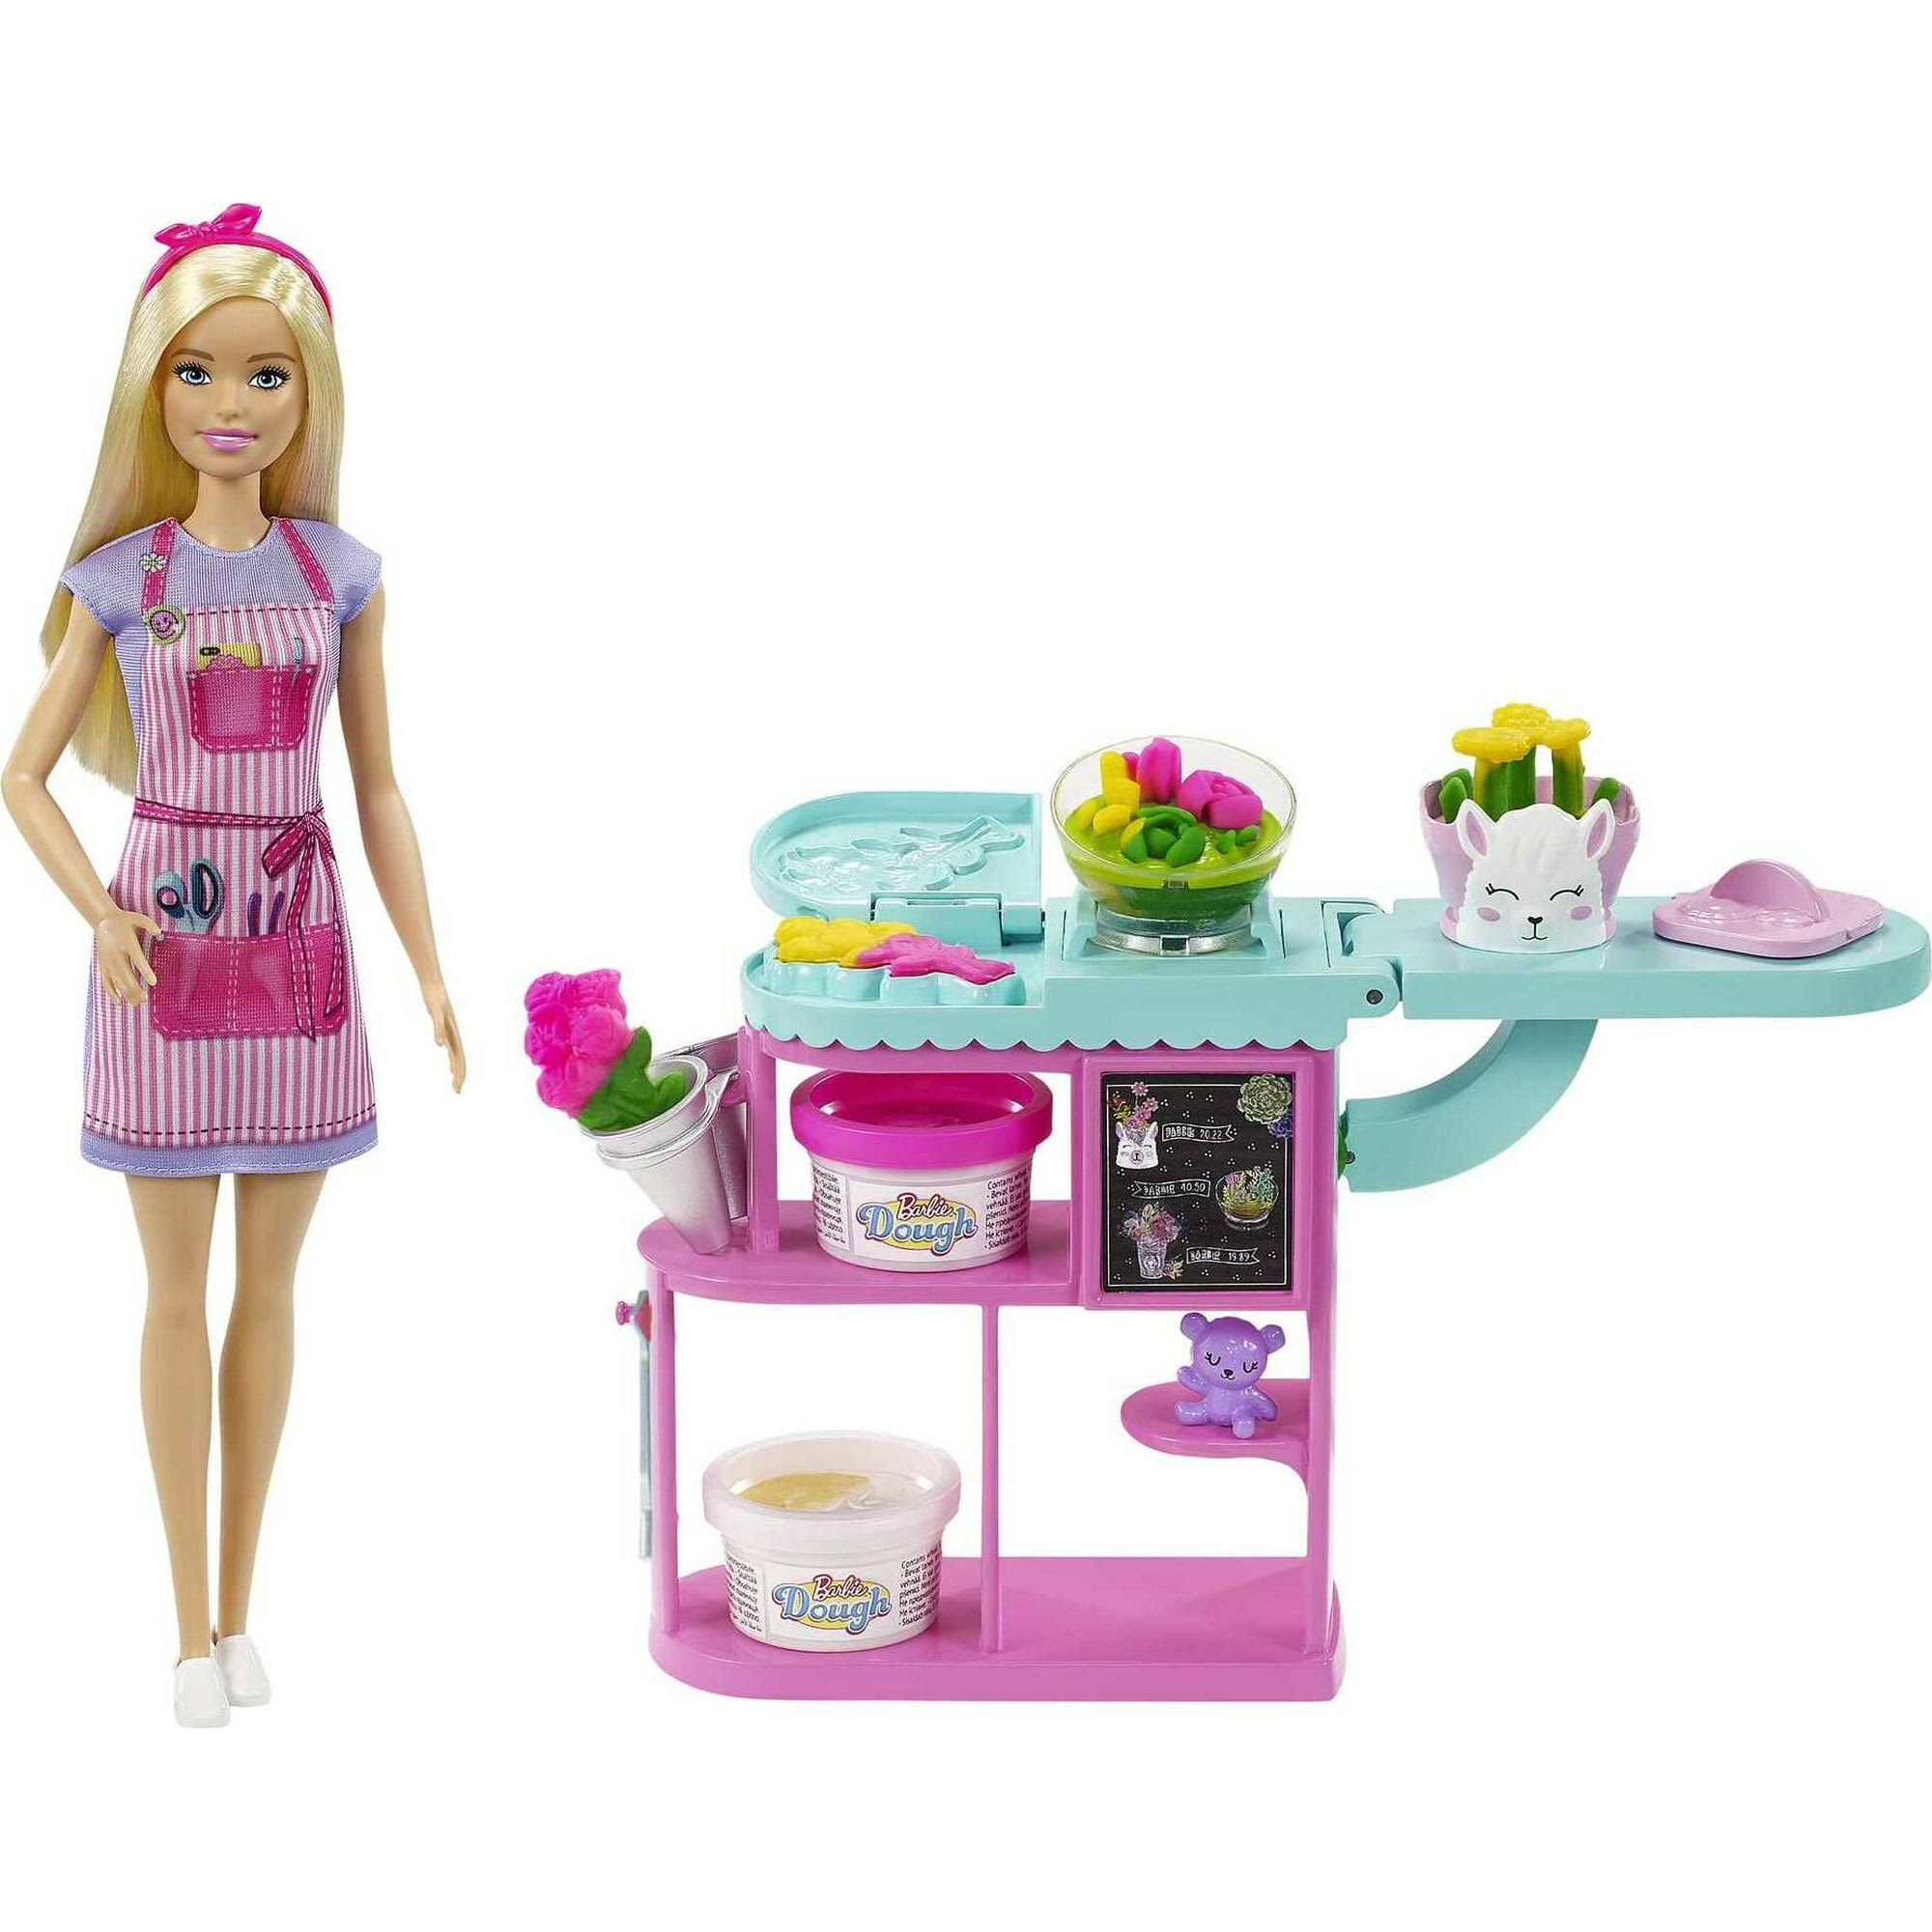 Barbie Florist Playset with Blonde Doll